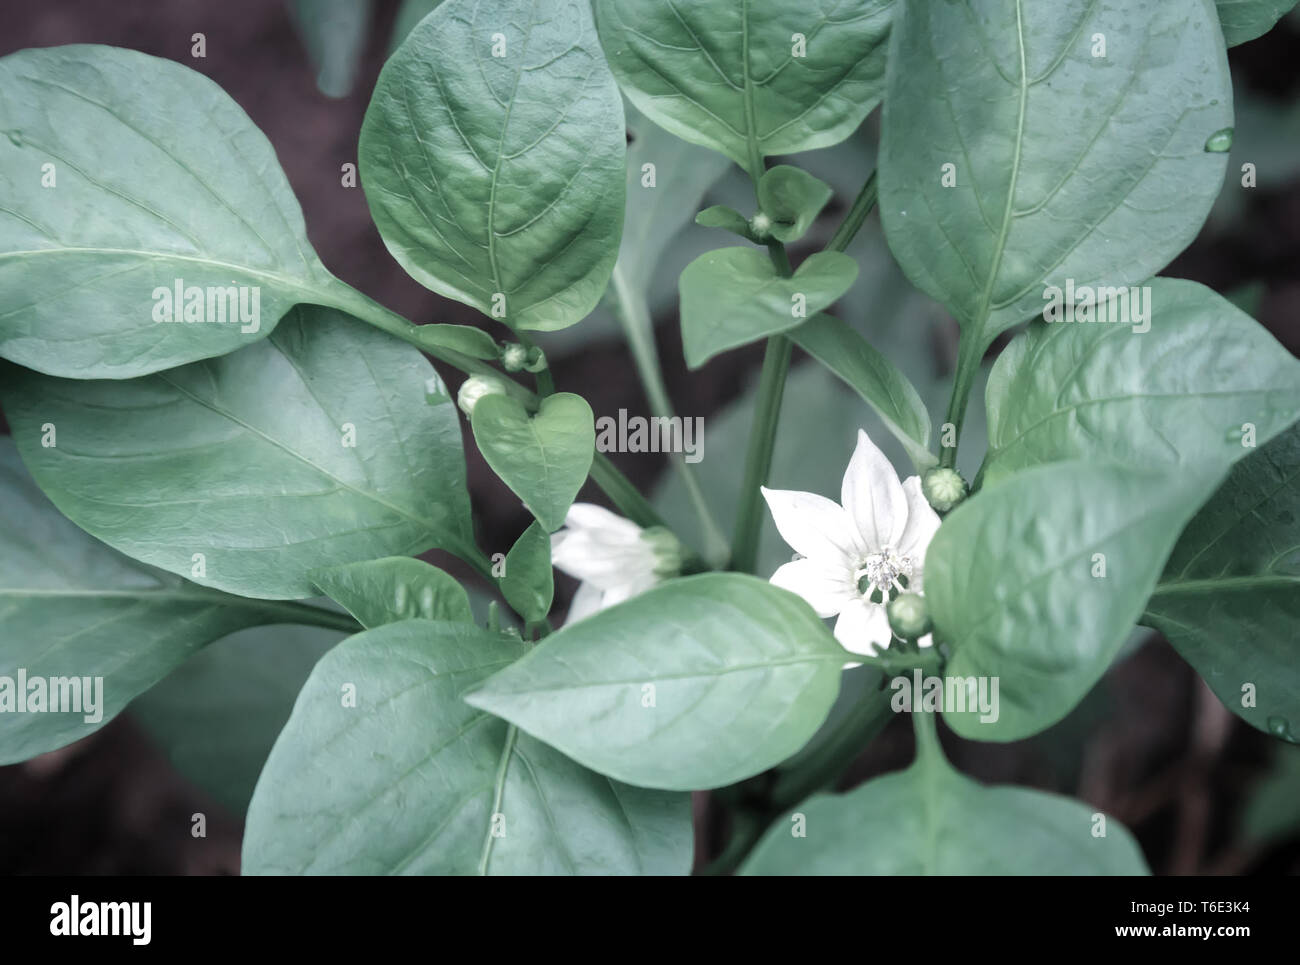 Pepper plant with flowers and buds. Stock Photo